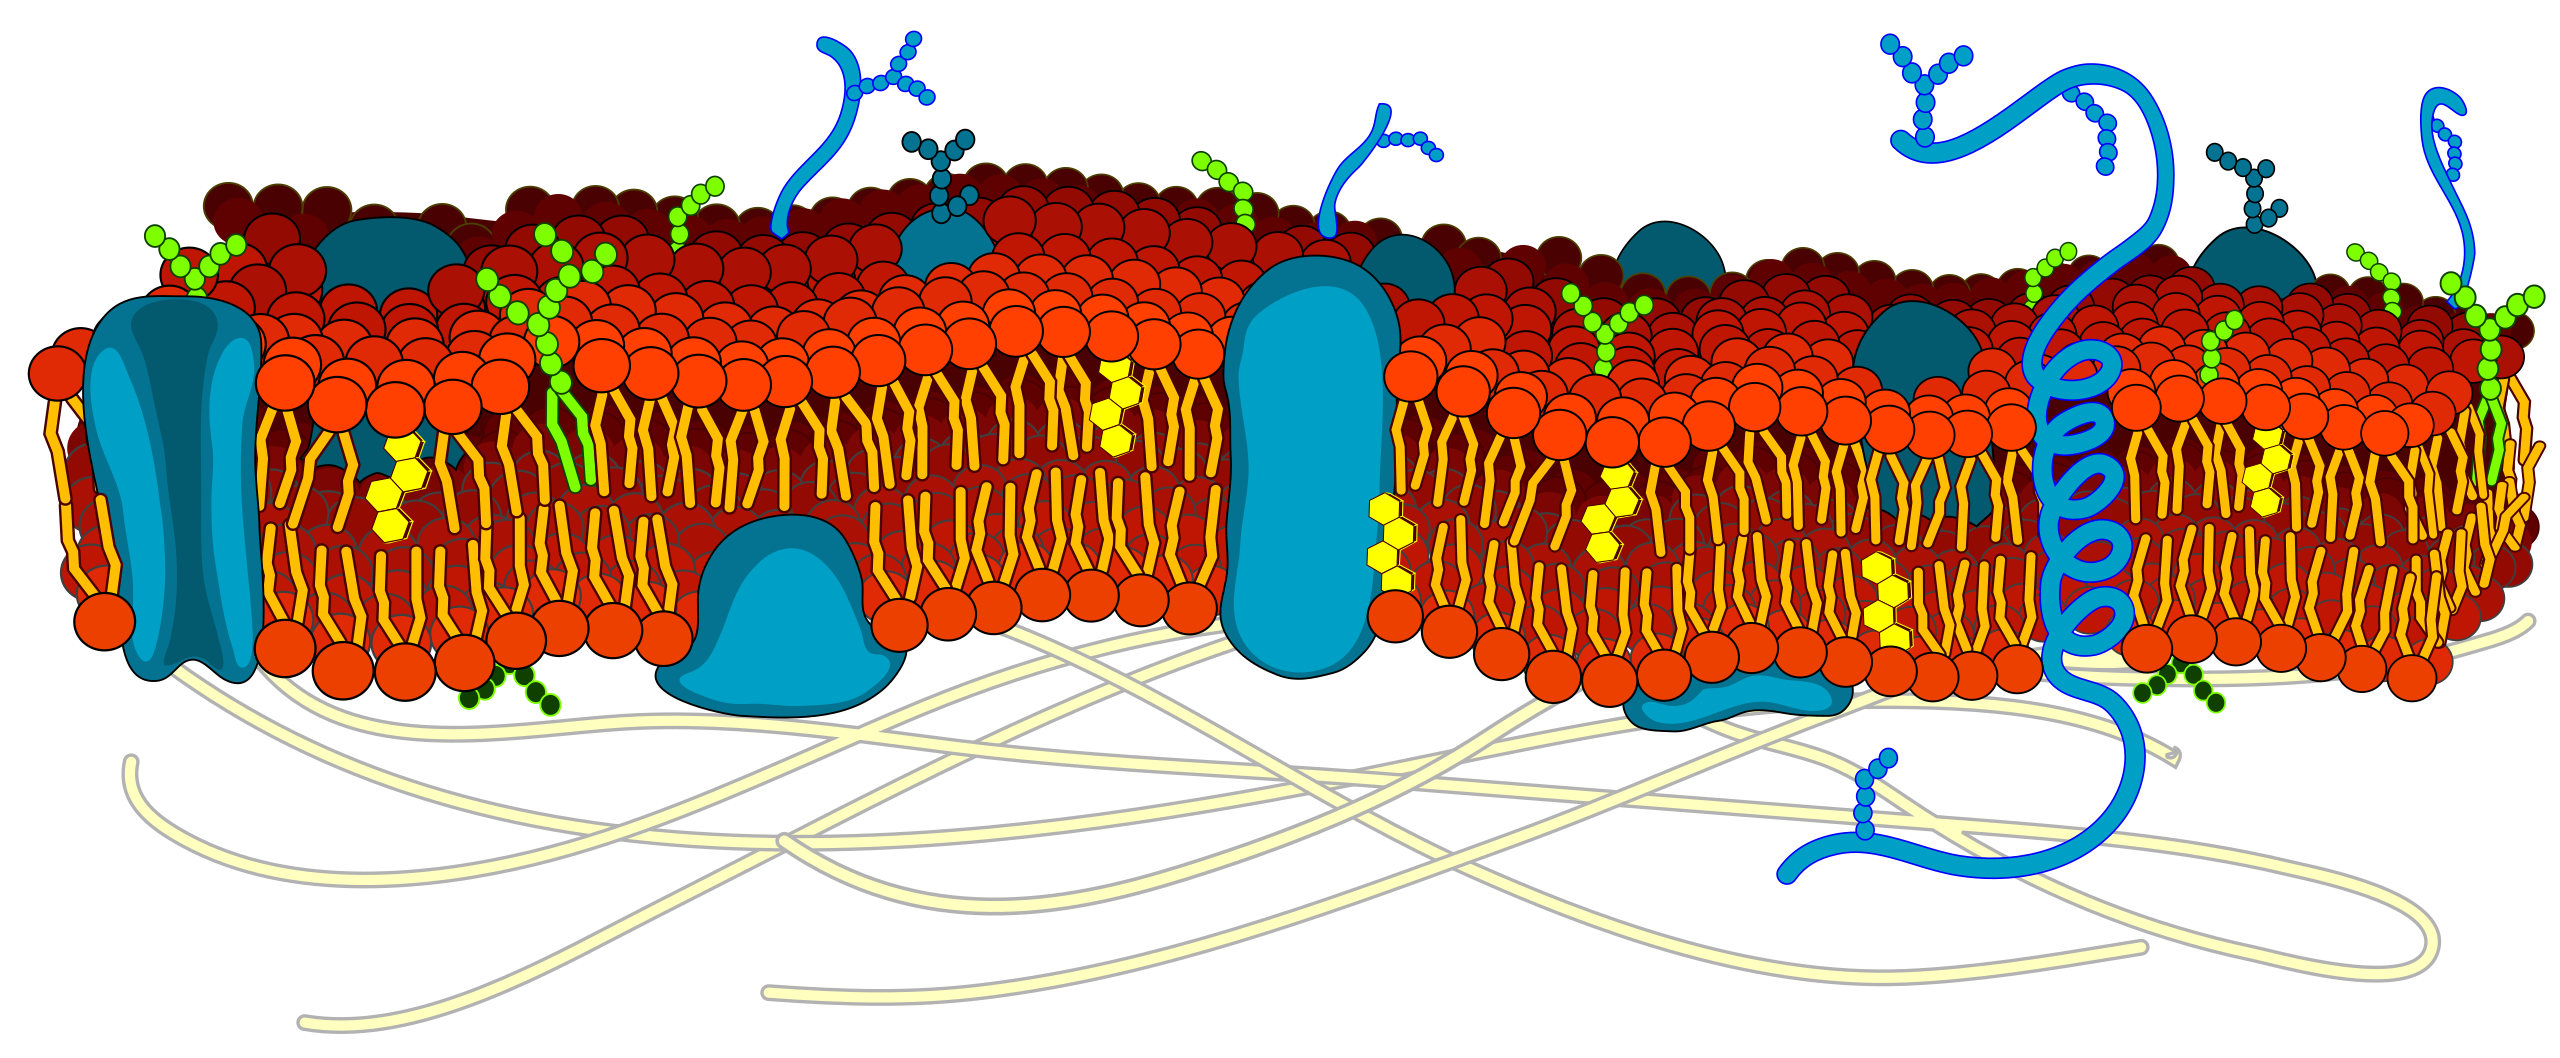 cell membrane detailed